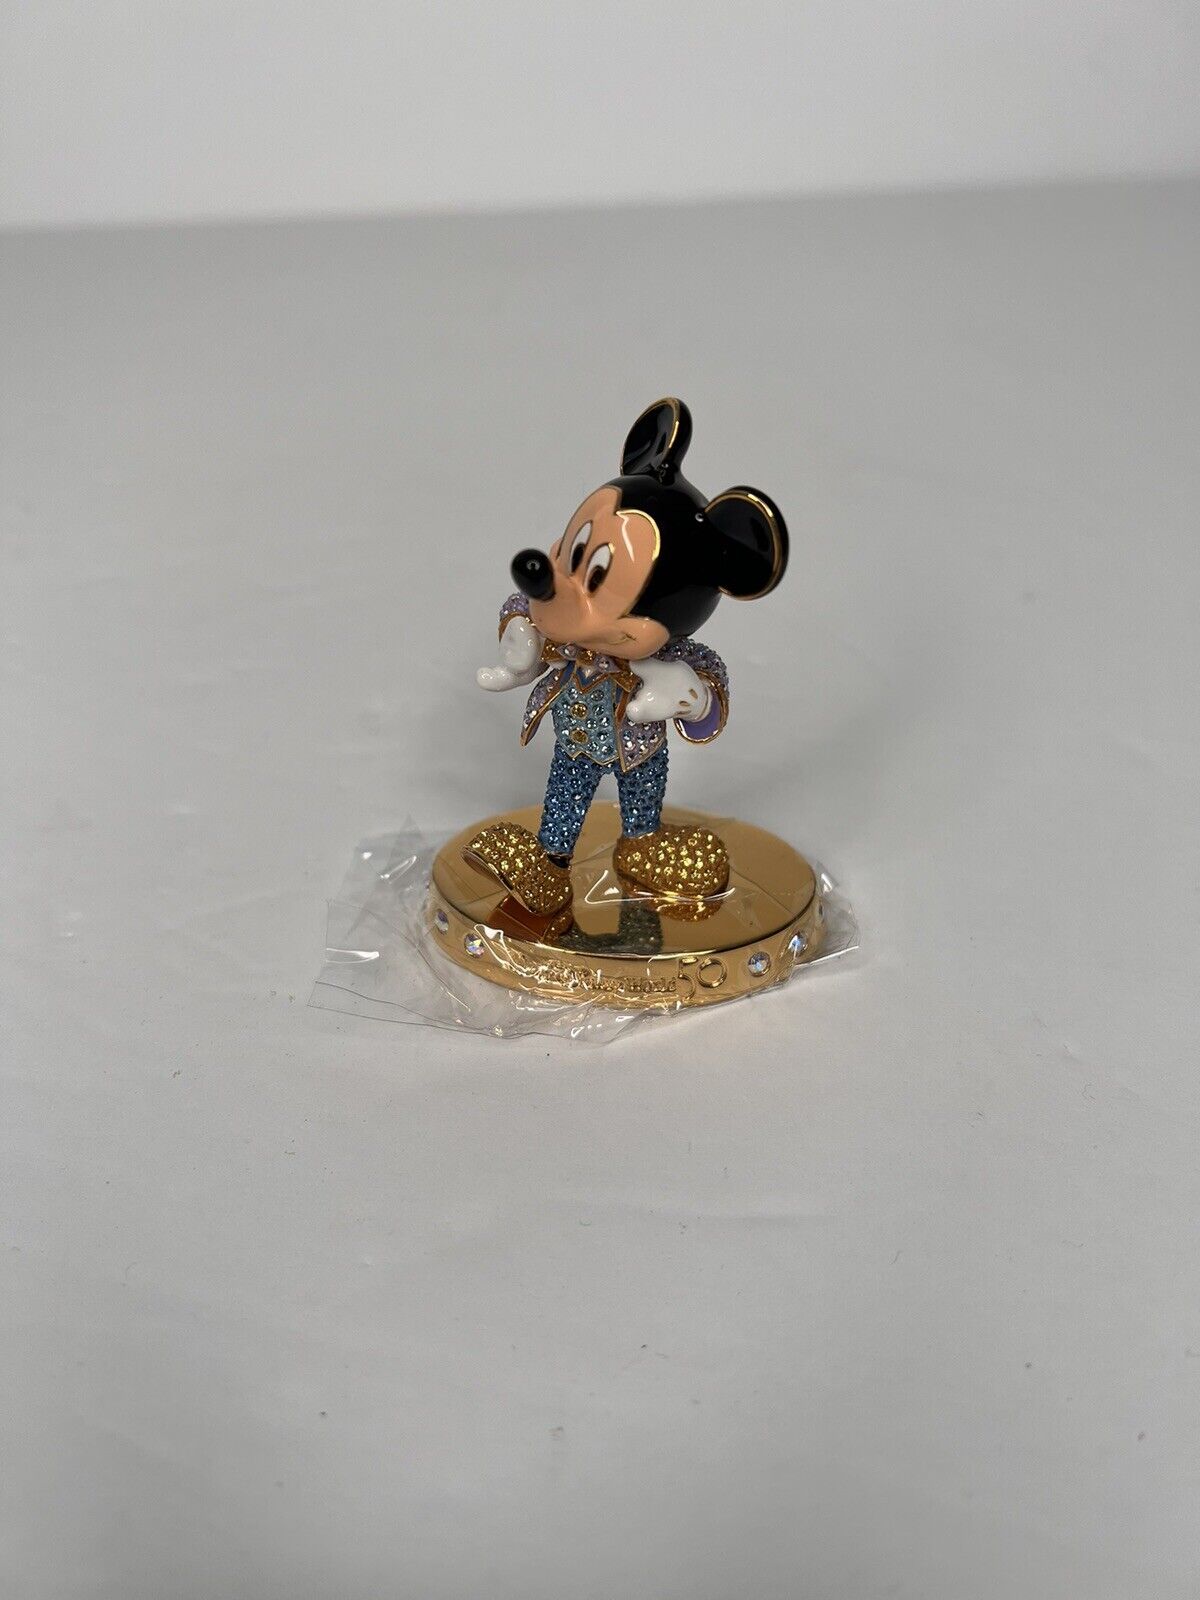 Disney Arribas Brothers Limited Edition 50th Anniversary Swarovski Mickey Mouse